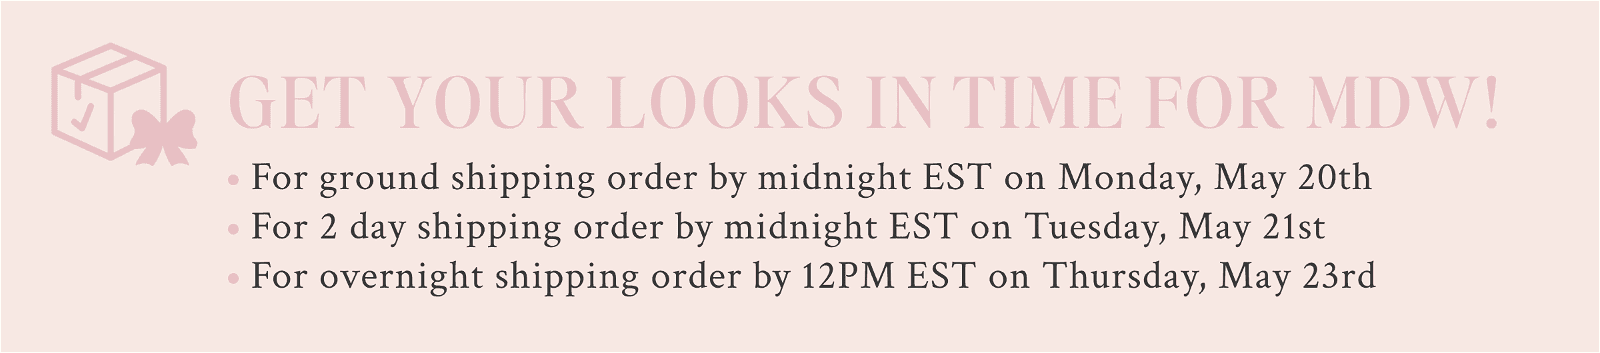 Get your looks in time for MDW. For ground shipping order by midnight EST on Monday, May 20th For 2 day shipping order by midnight EST on Tuesday, May 21st For overnight shipping order by 12PM EST on Thursday, May 23rd